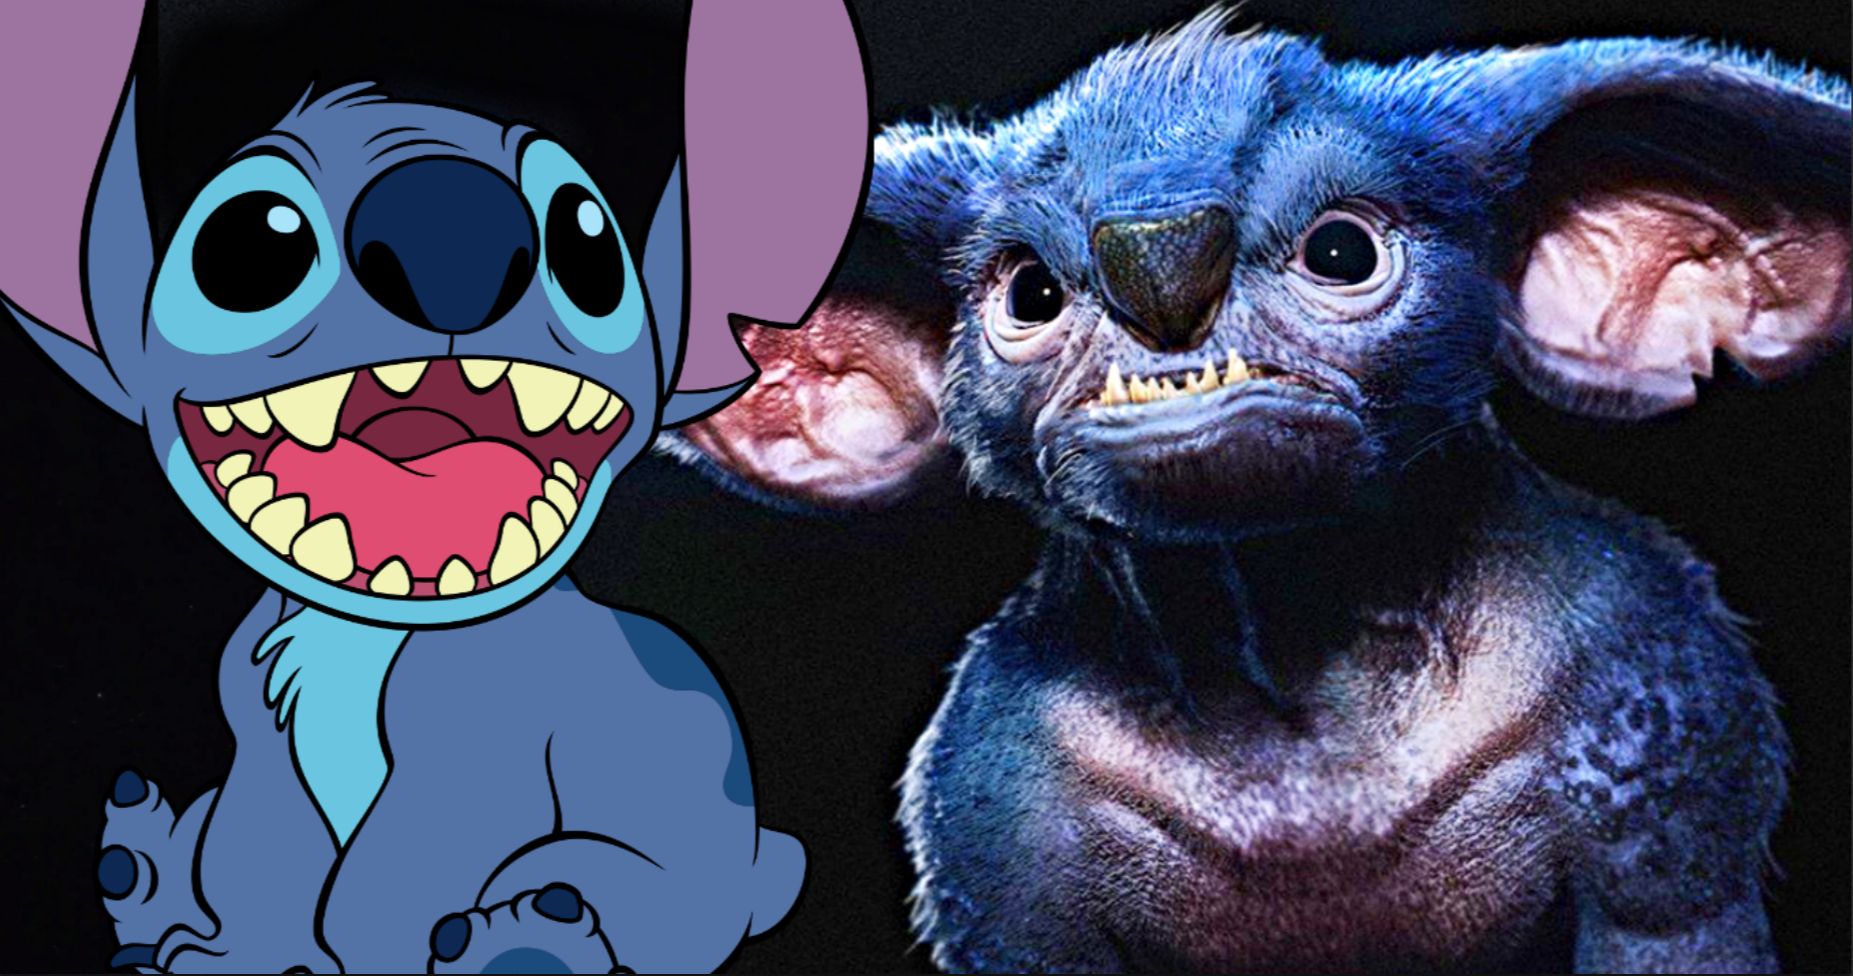 Lilo & Stitch Live-Action Remake Is Heading Straight to Disney+